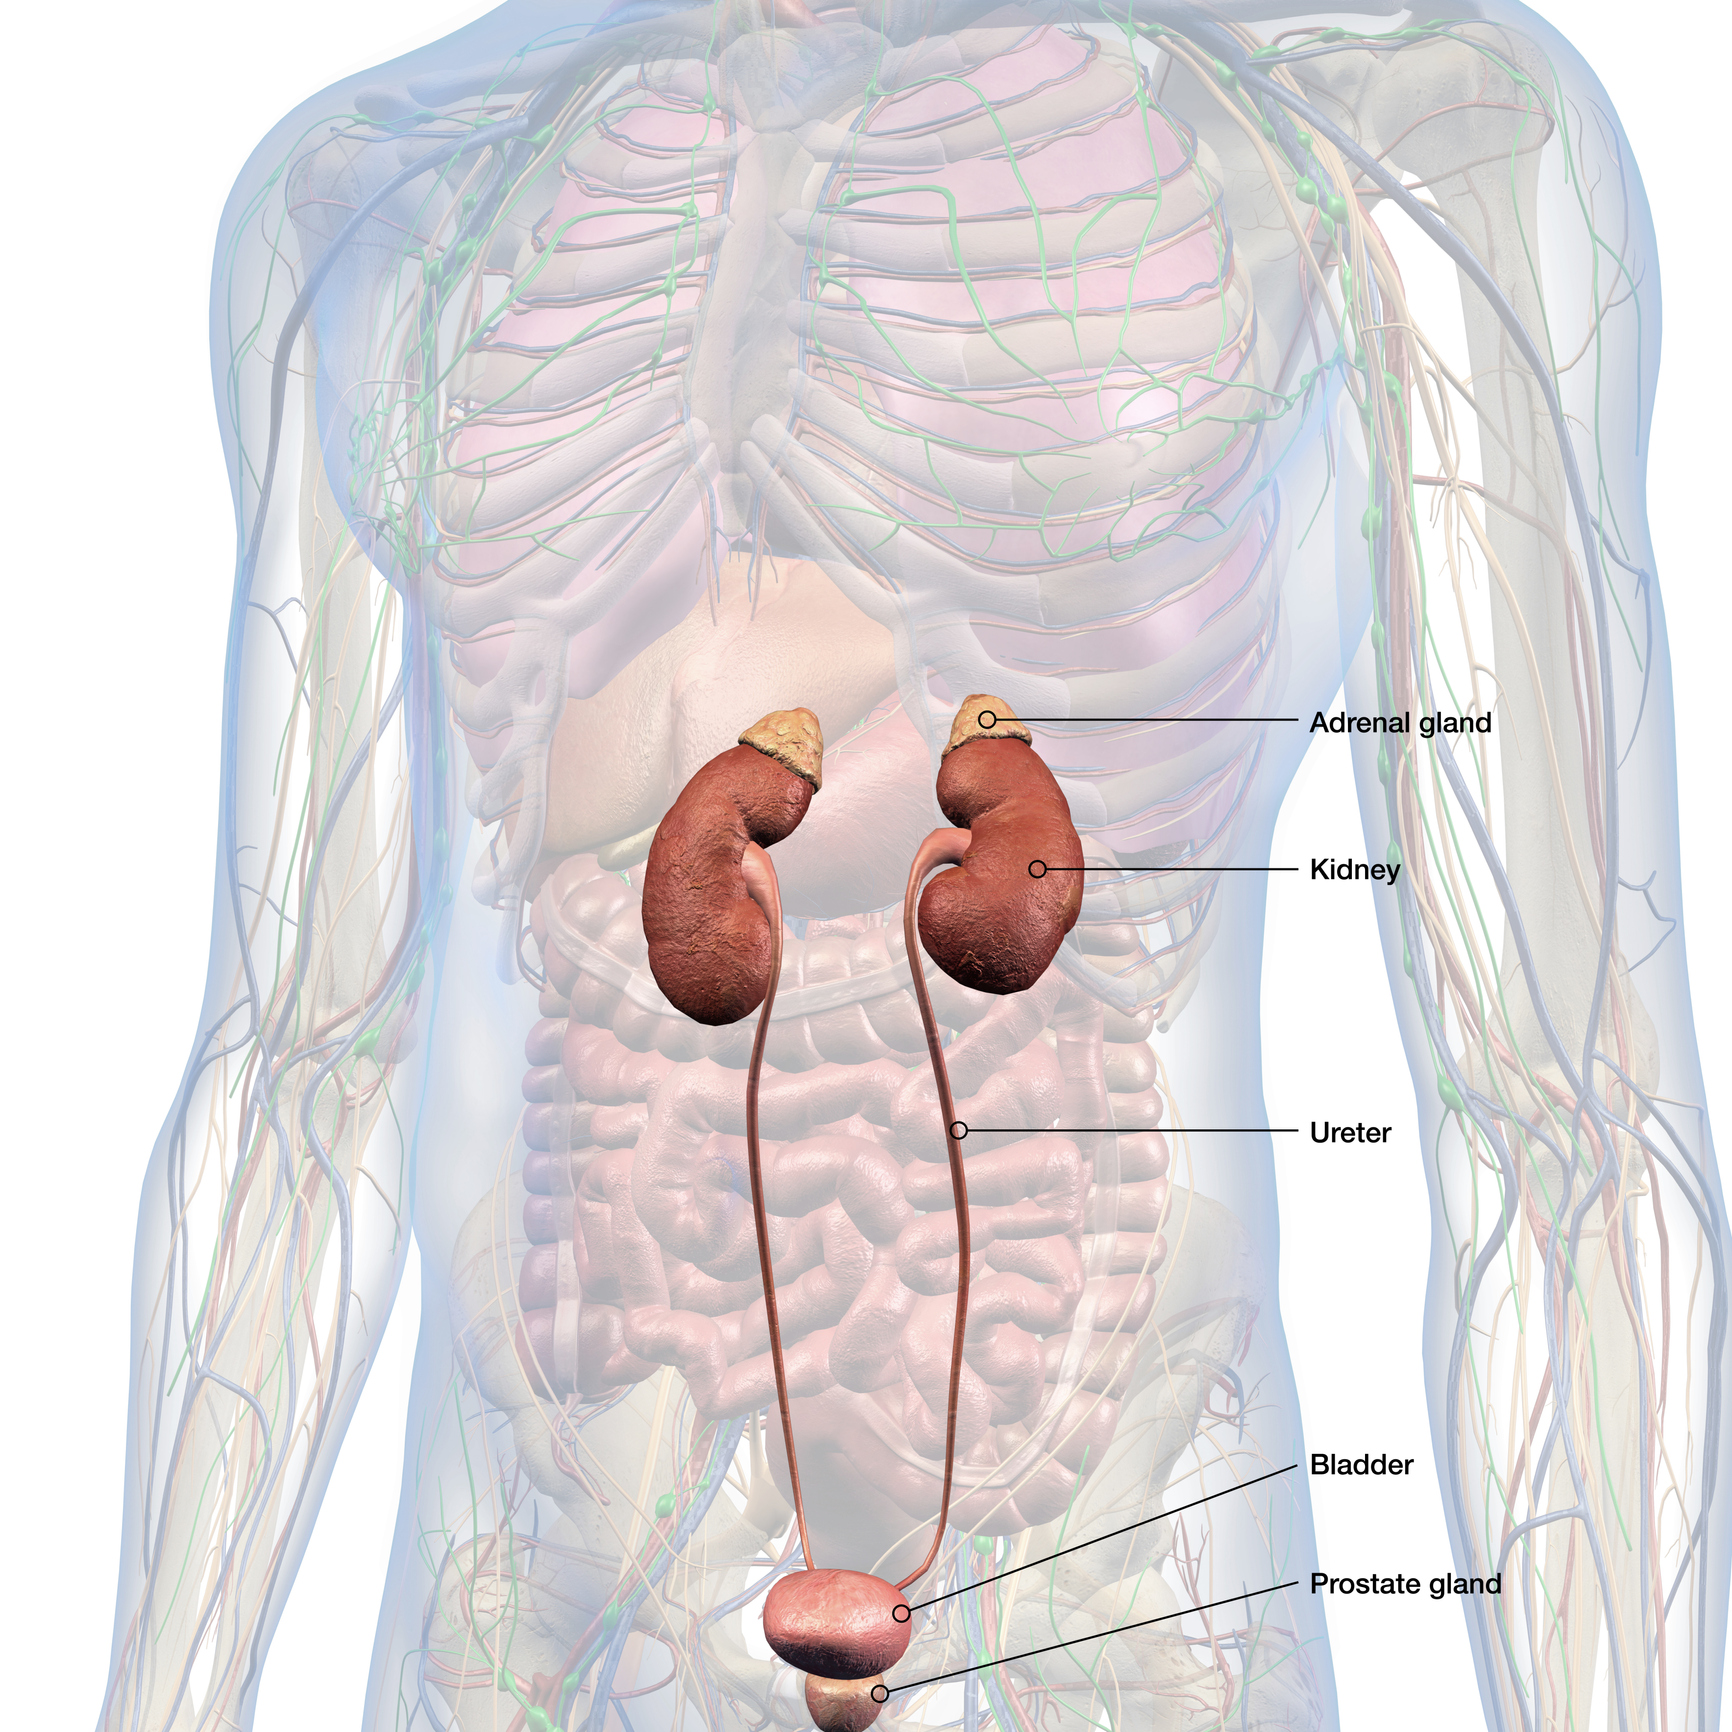 where is the adrenal gland located in the human body